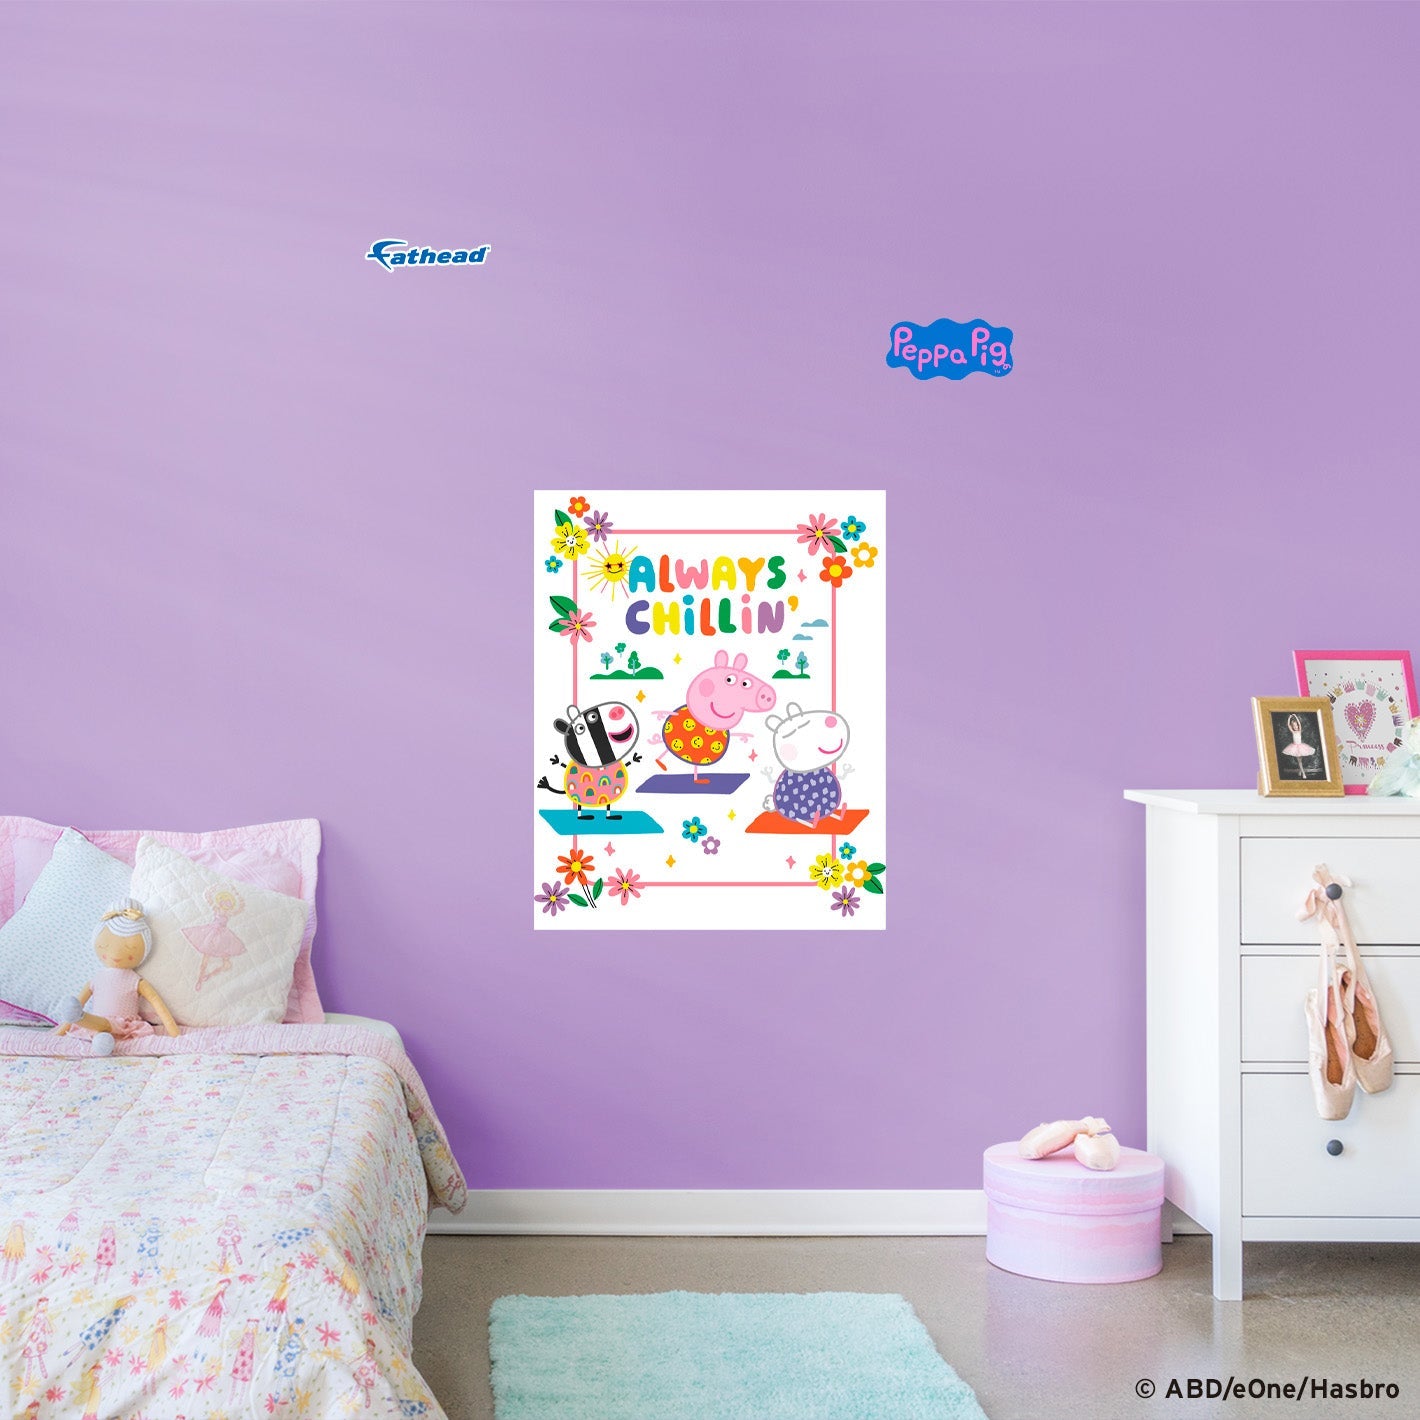 Peppa Pig: Always Chillin' Poster - Officially Licensed Hasbro Removable Adhesive Decal